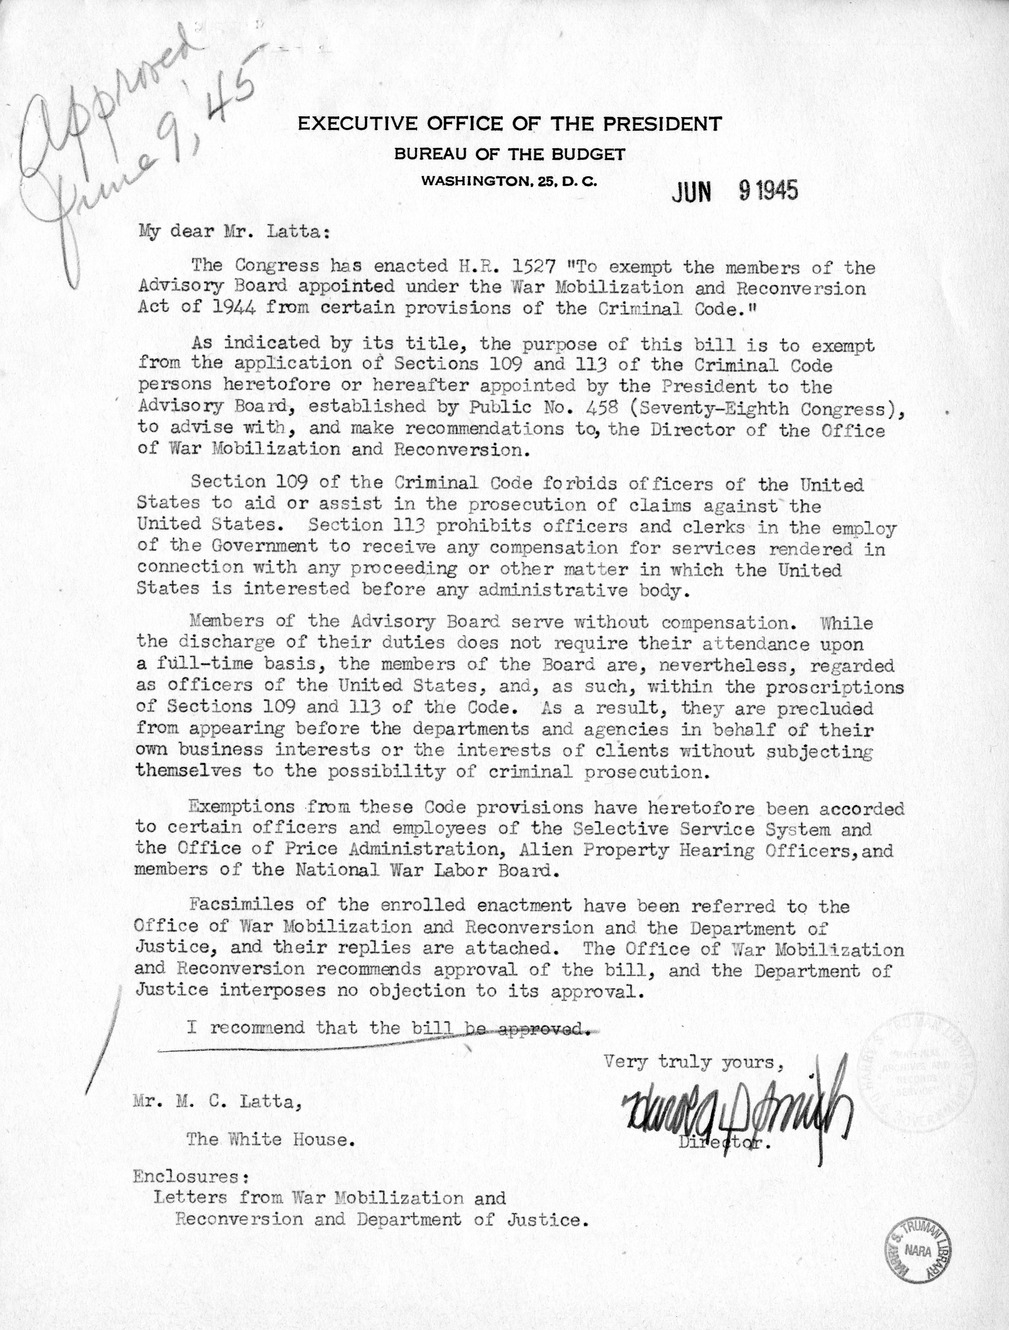 Memorandum from Harold D. Smith to M. C. Latta, H.R. 1527, To Exempt the Members of the Advisory Board Appointed Under the War Mobilization and Reconversion Act of 1944 From Certain Provisions of the Criminal Code, with Attachments